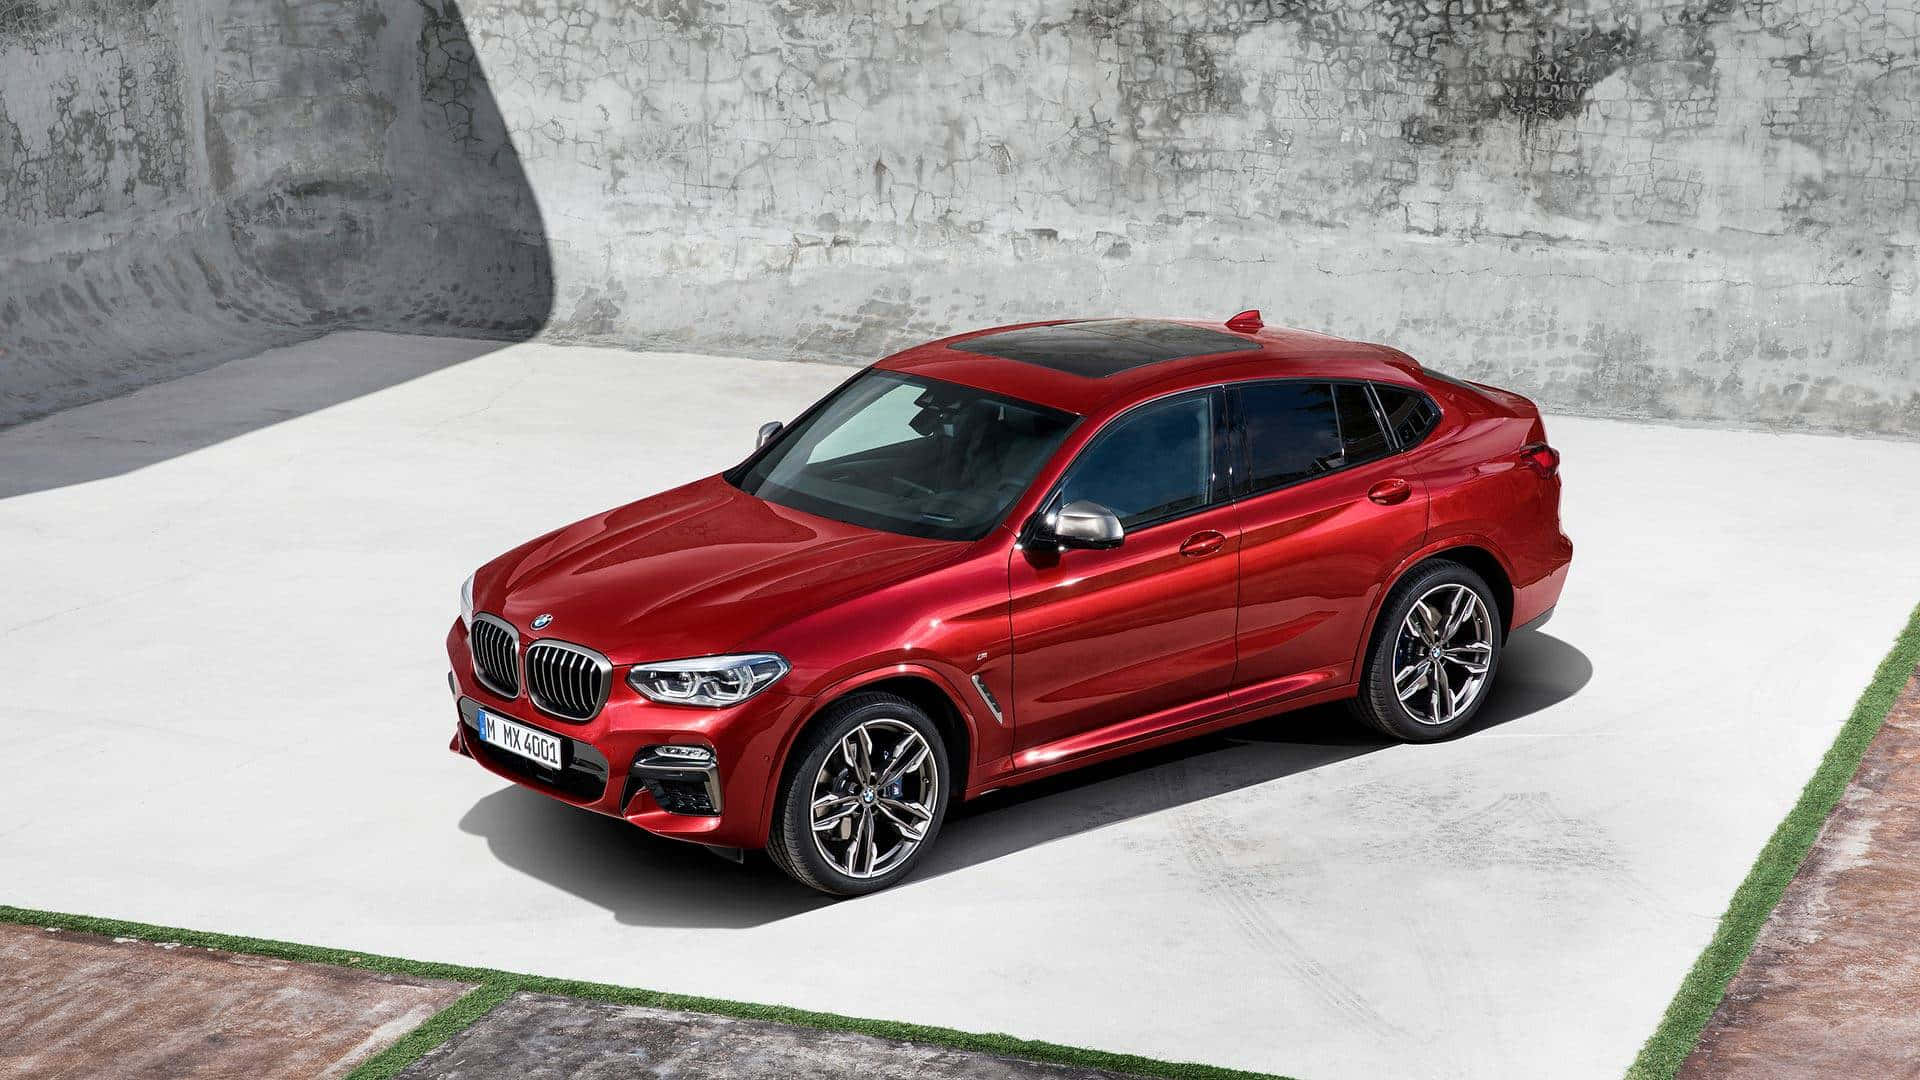 Sleek and Bold - The BMW X4 Sports Activity Coupe Wallpaper